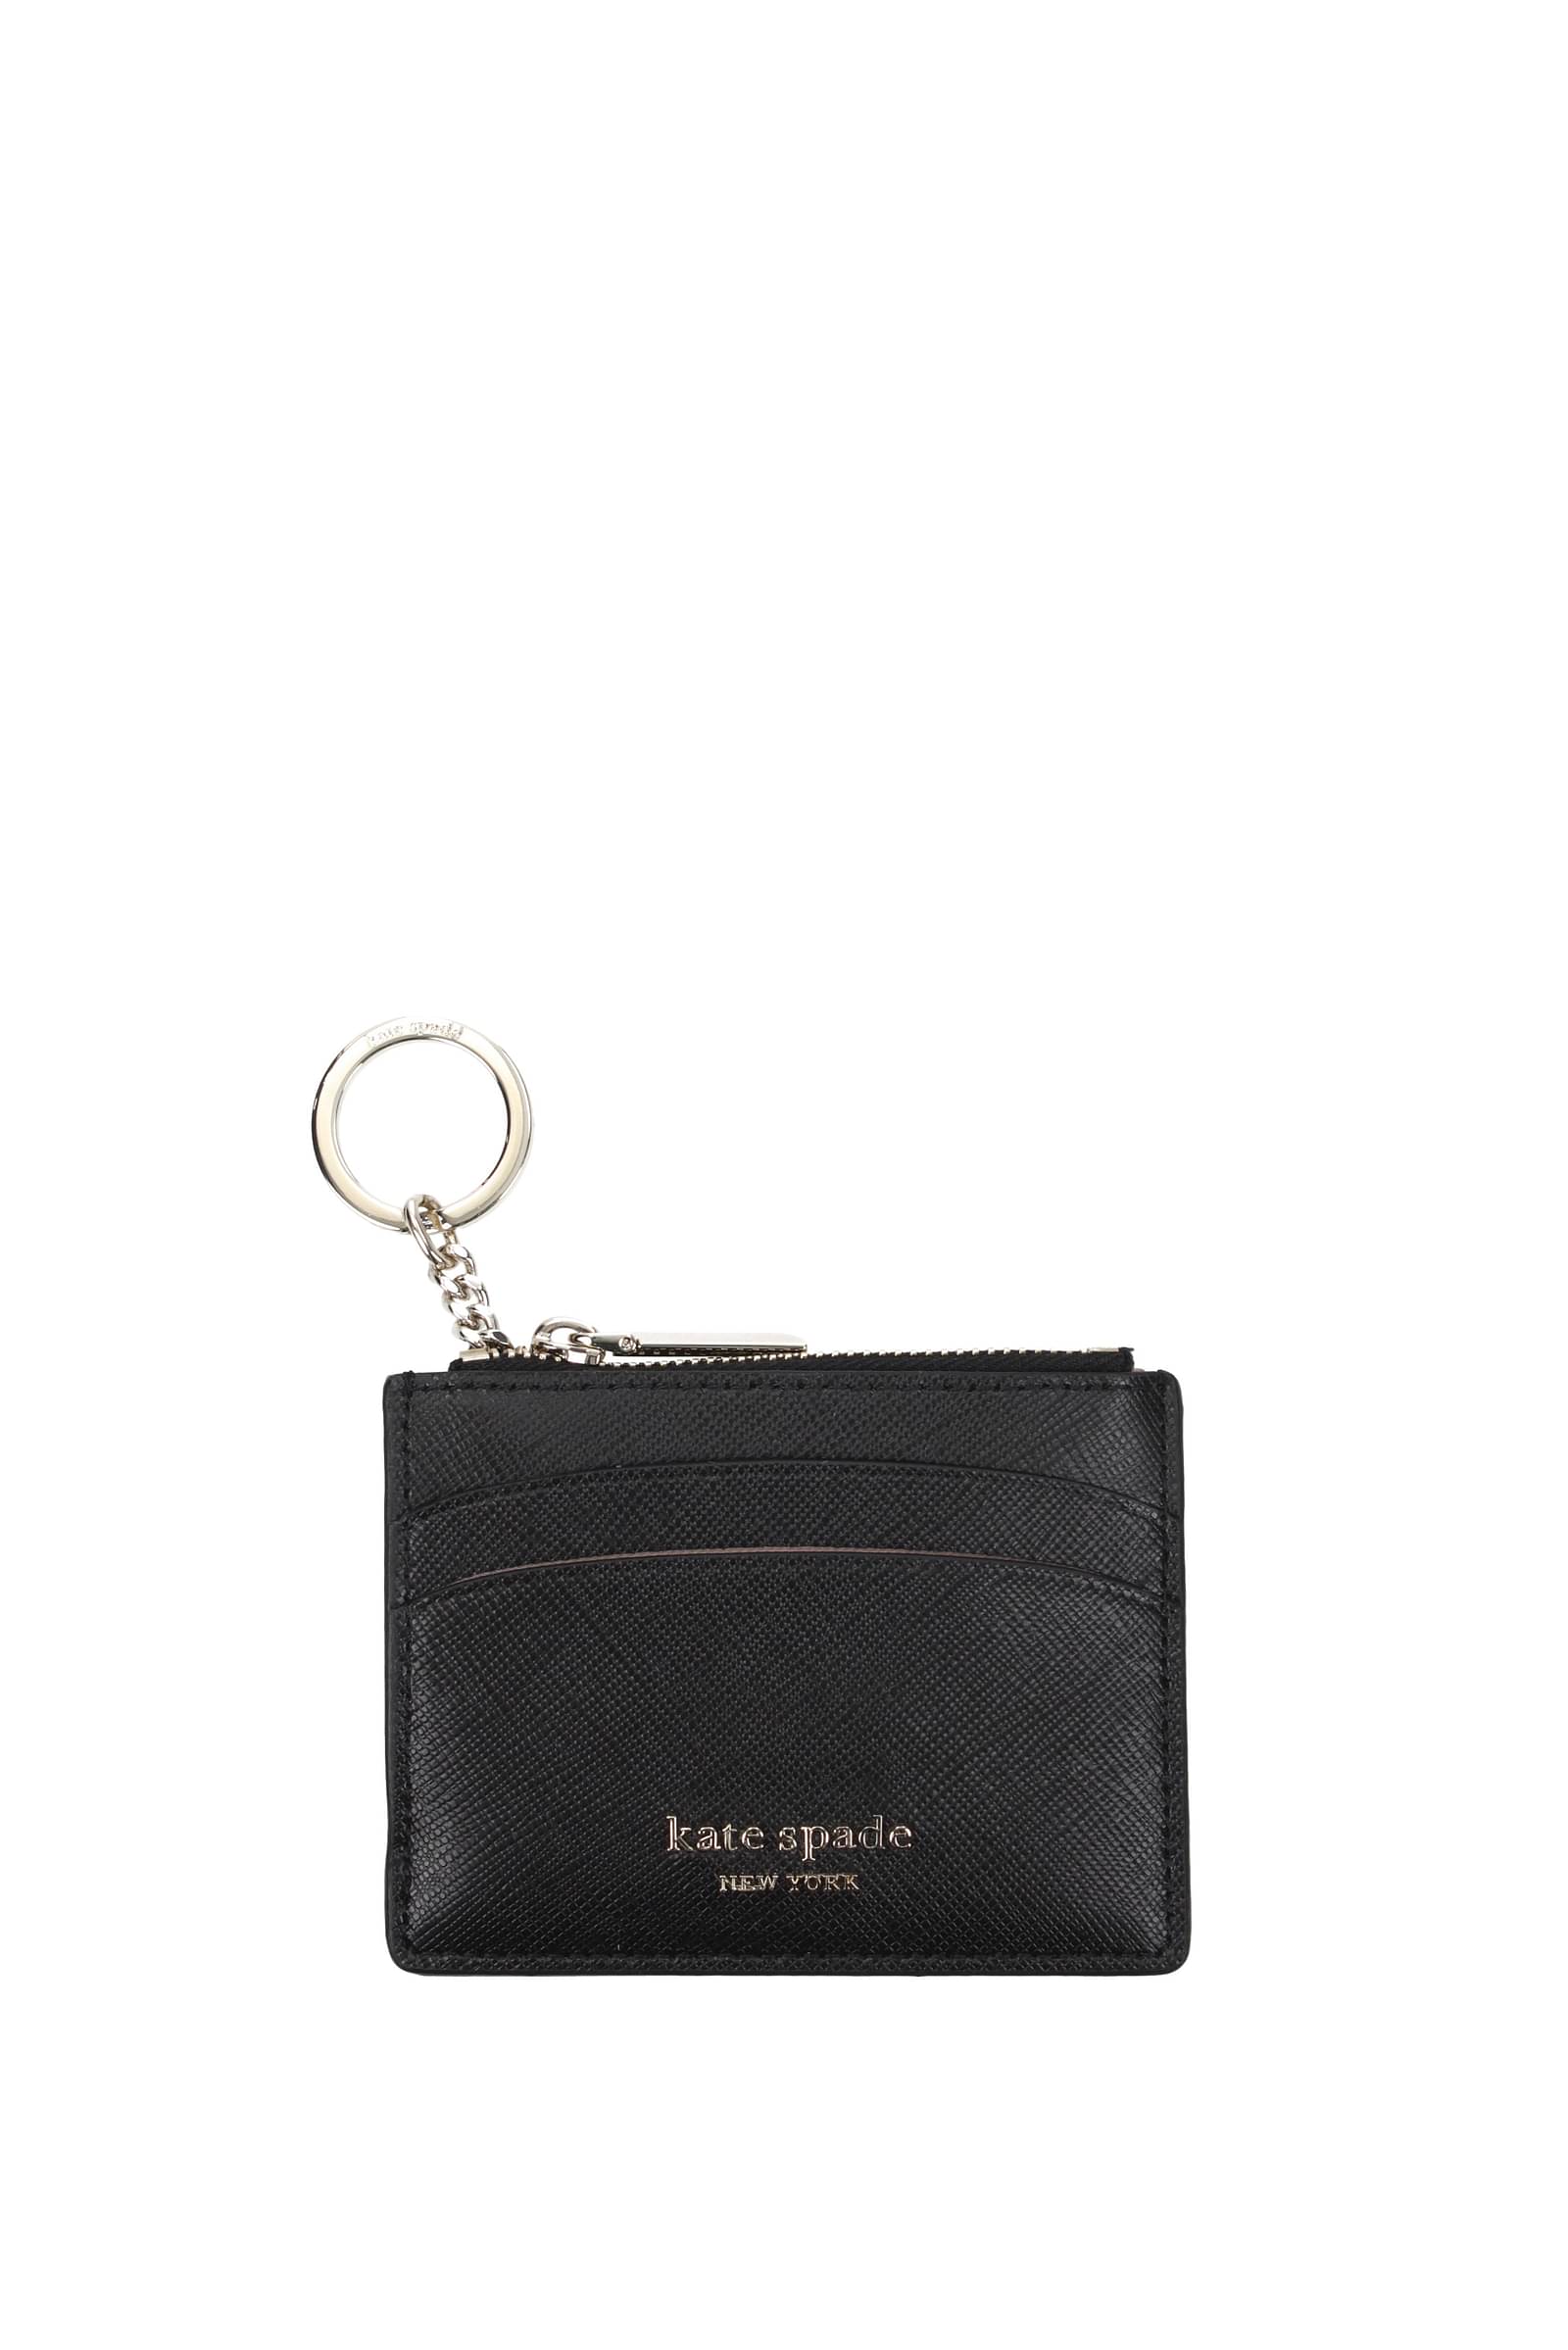 Designer Deal of the Day on Women's Accessories | Kate Spade Outlet